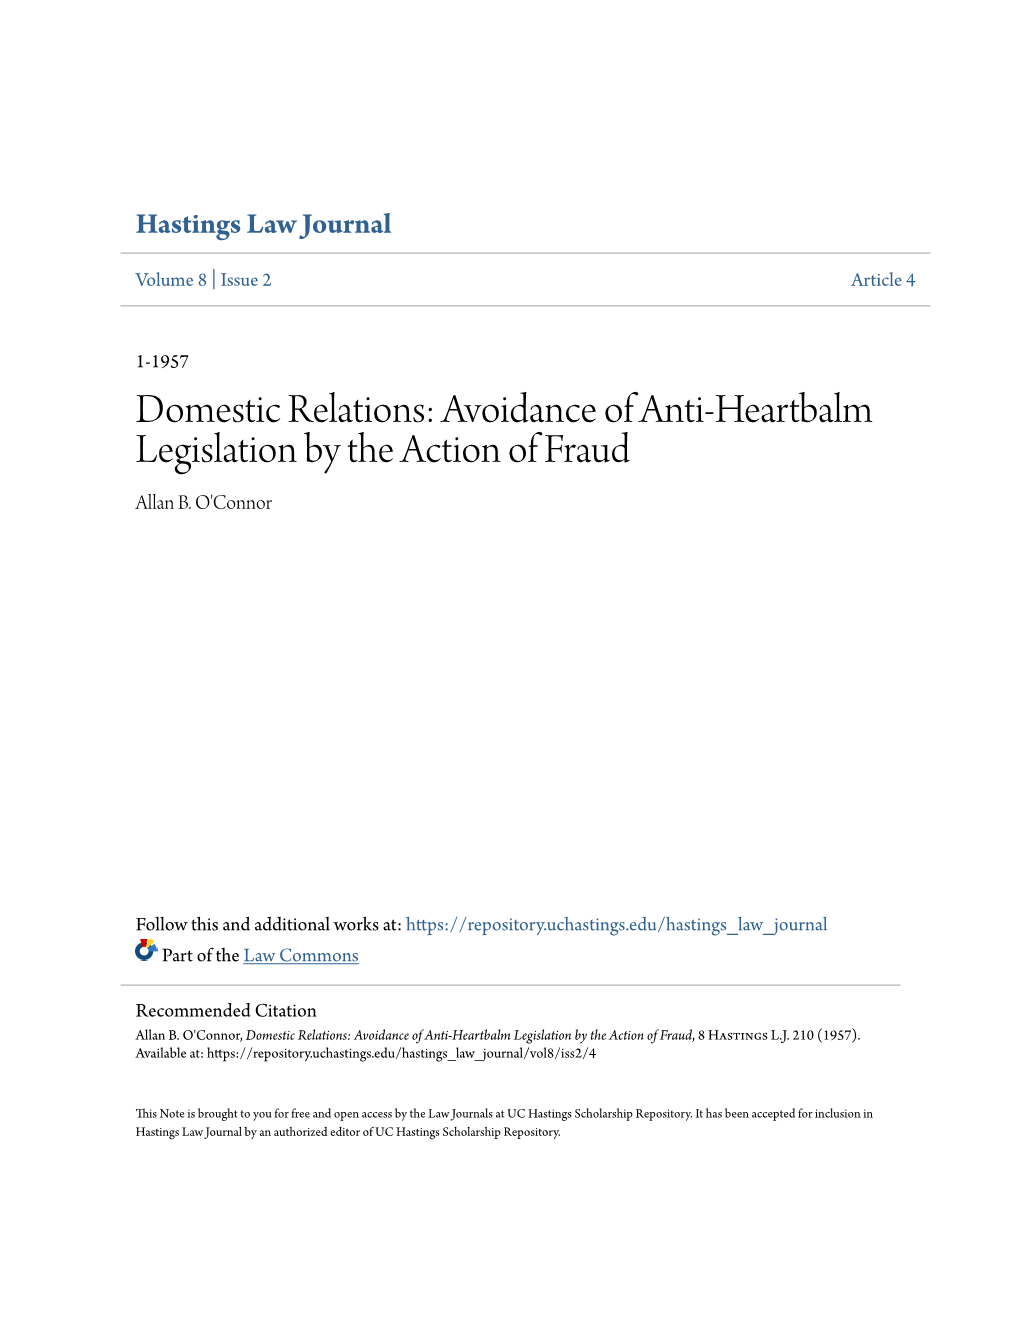 Domestic Relations: Avoidance of Anti-Heartbalm Legislation by the Action of Fraud Allan B